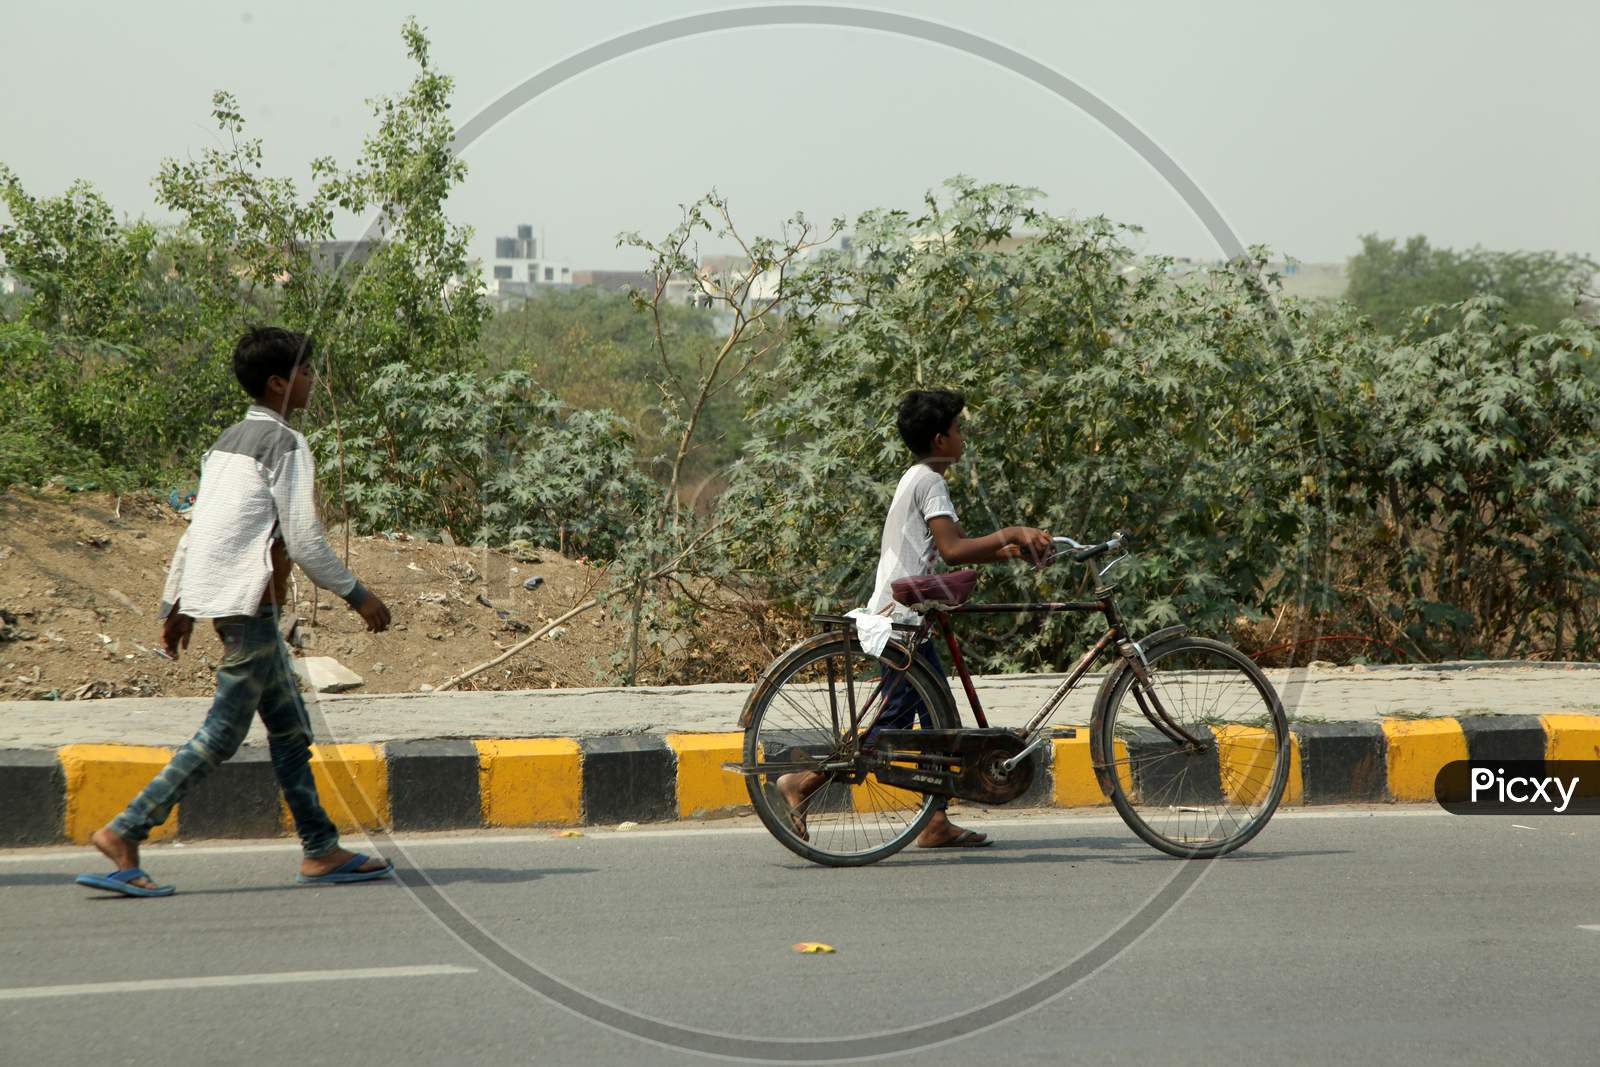 A Kids walking with Bicycle